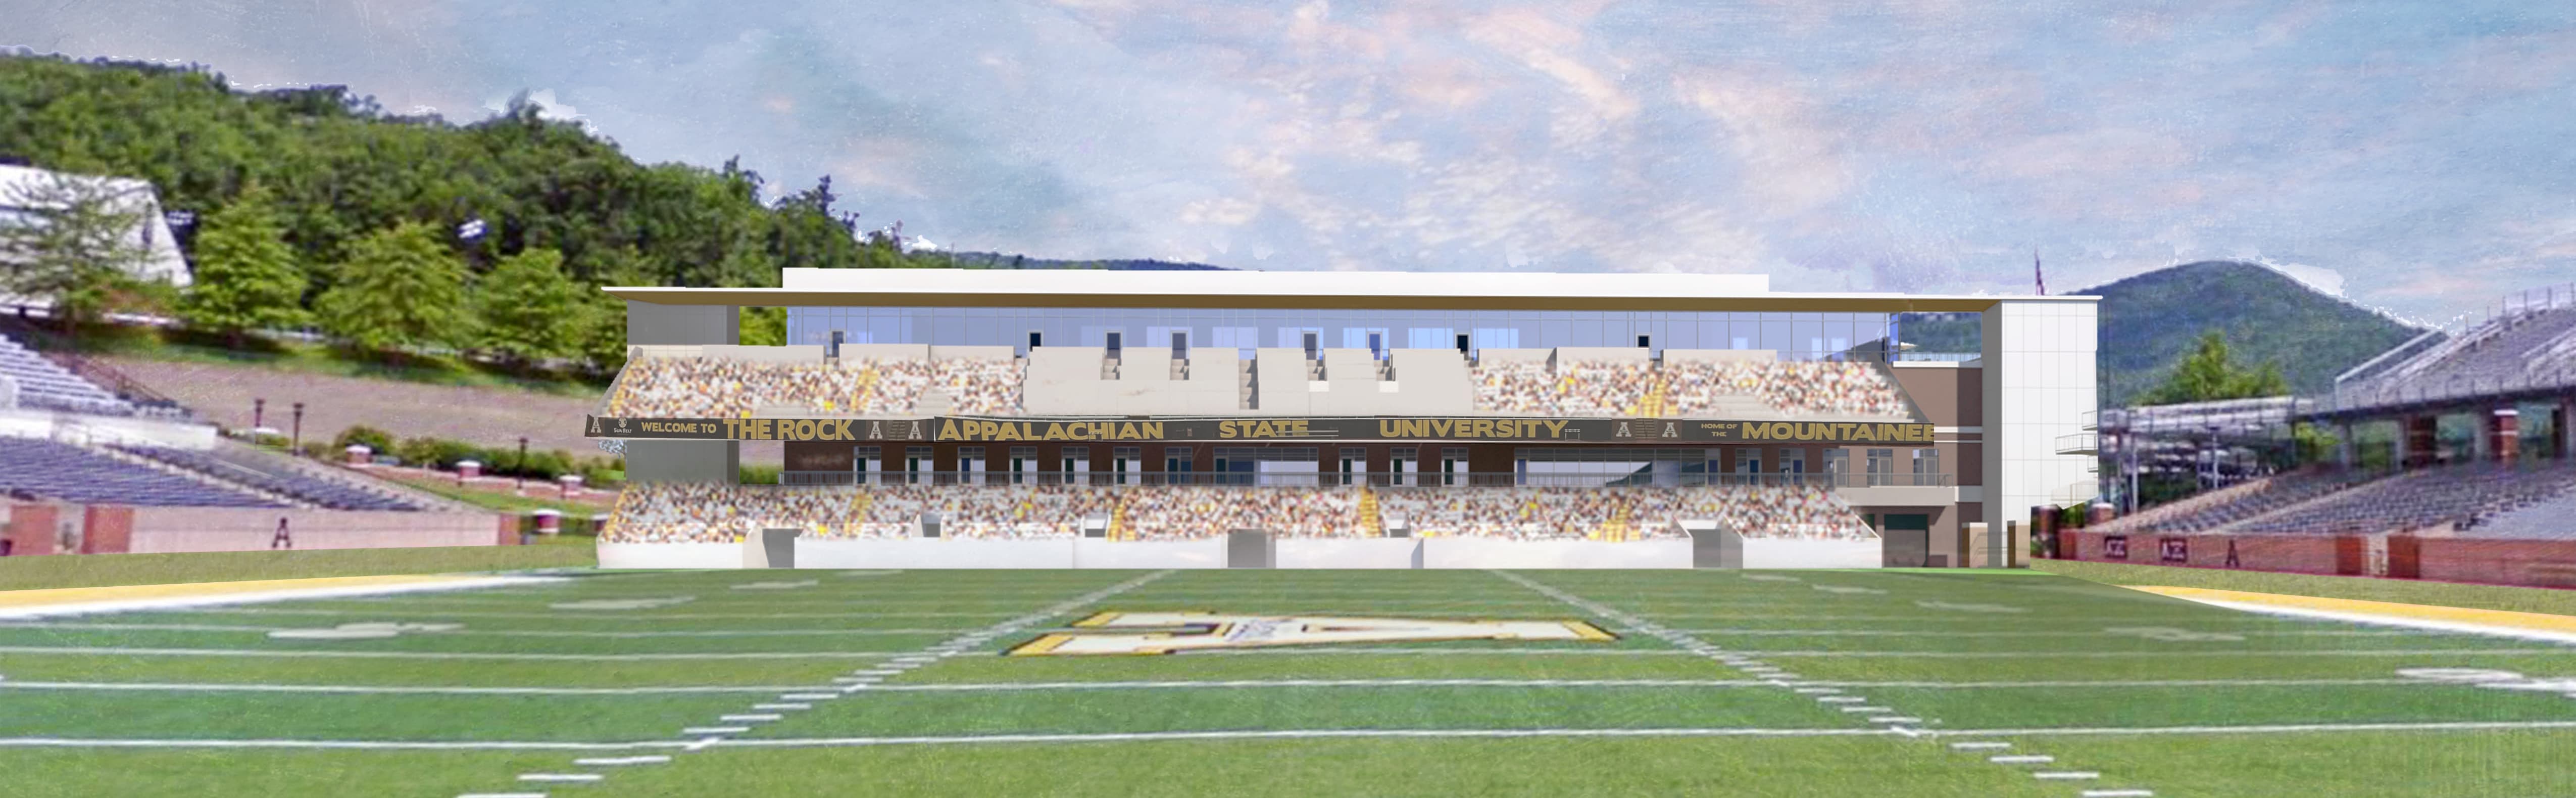 Rendering of north end zone project